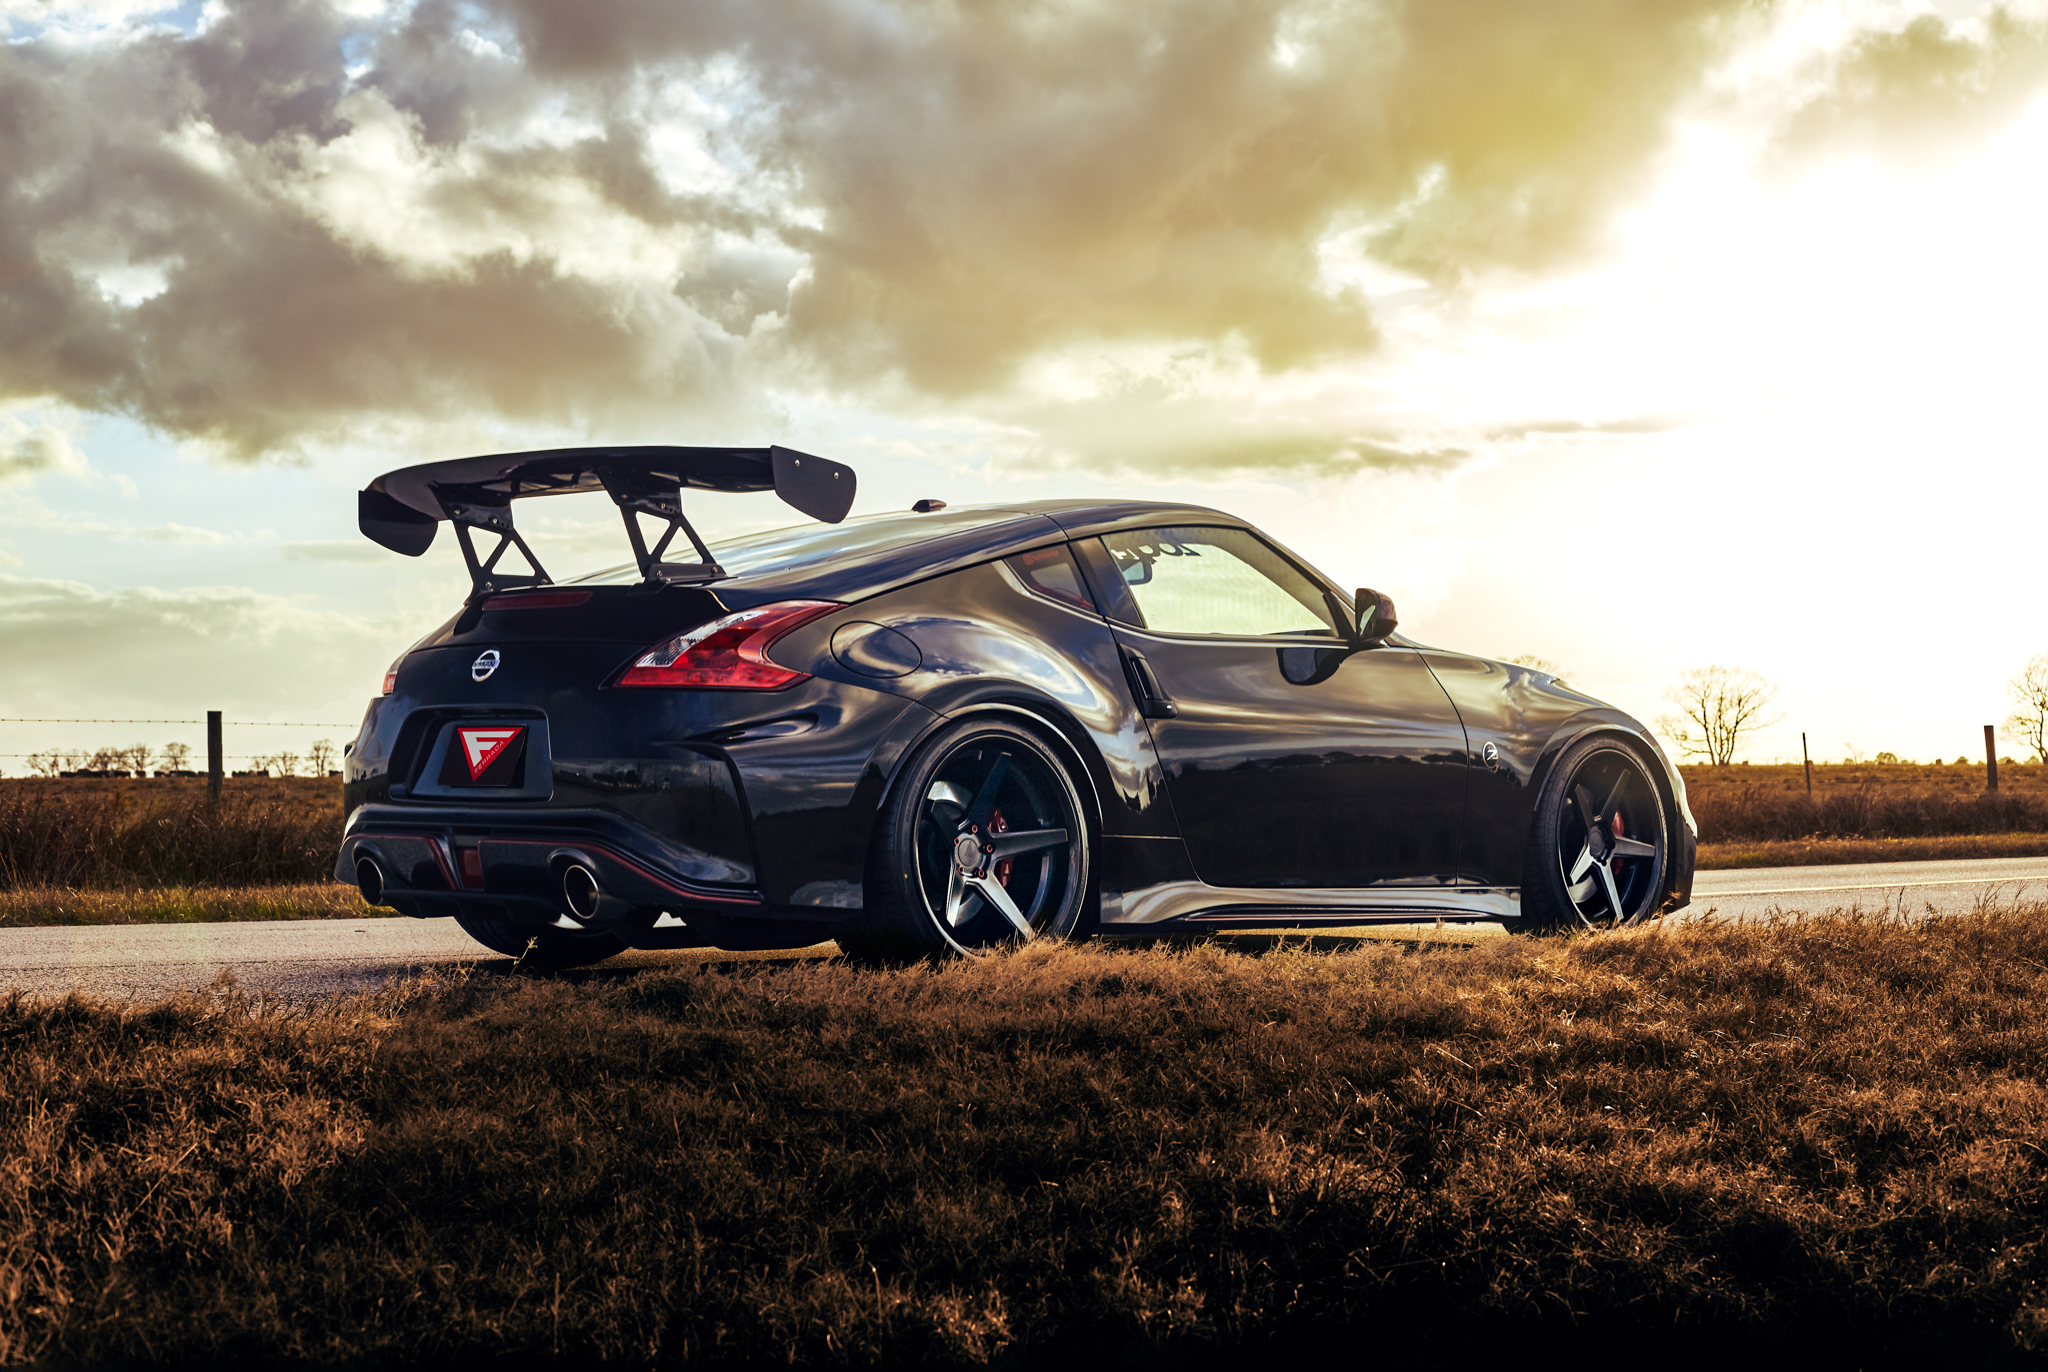 Download wallpaper 938x1668 nissan 370z, nissan, car, black, fog iphone  8/7/6s/6 for parallax hd background